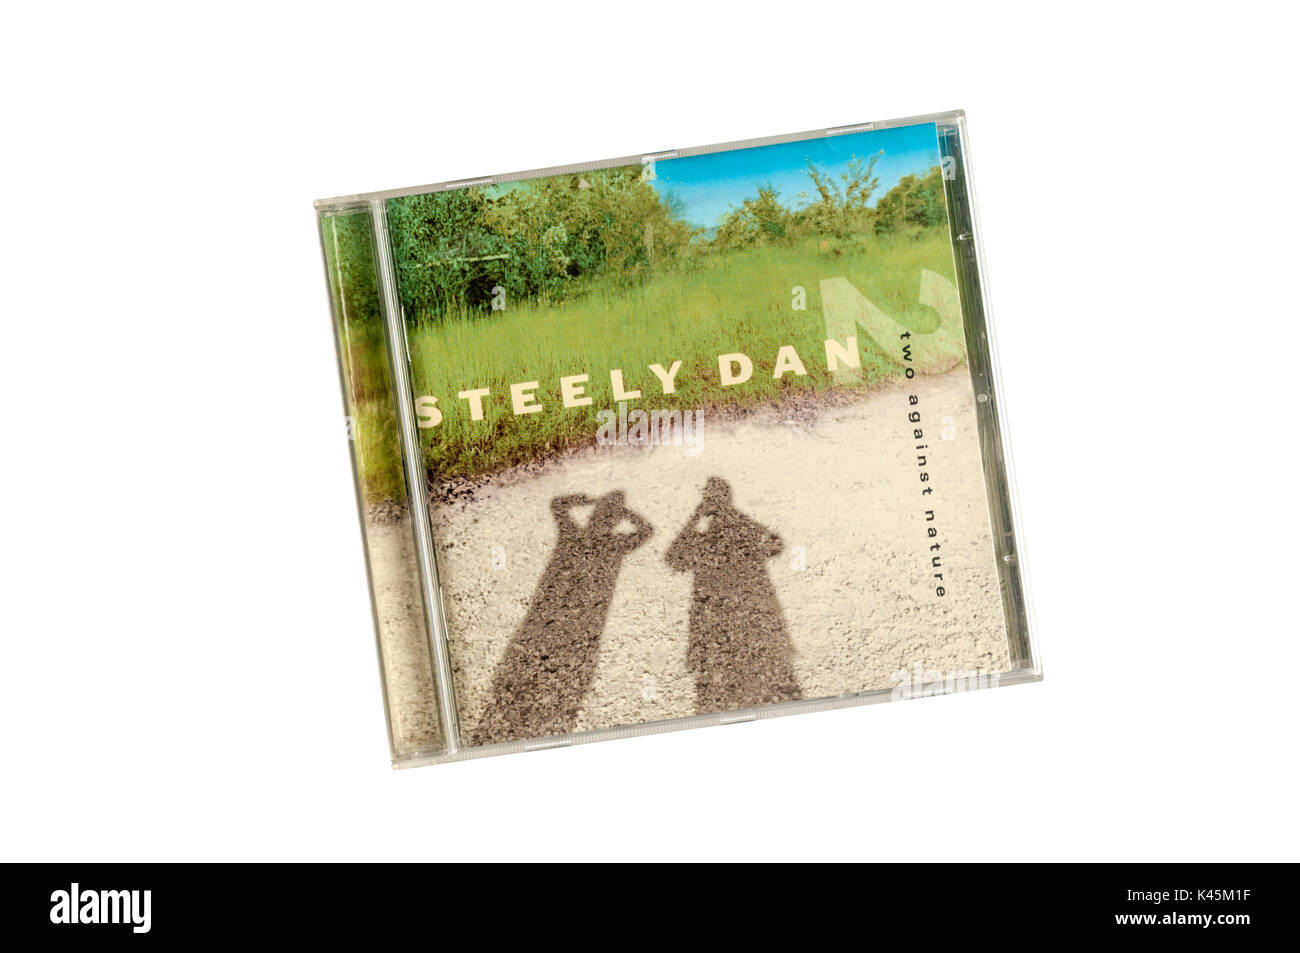 Steely dan album hi-res stock photography and images - Alamy